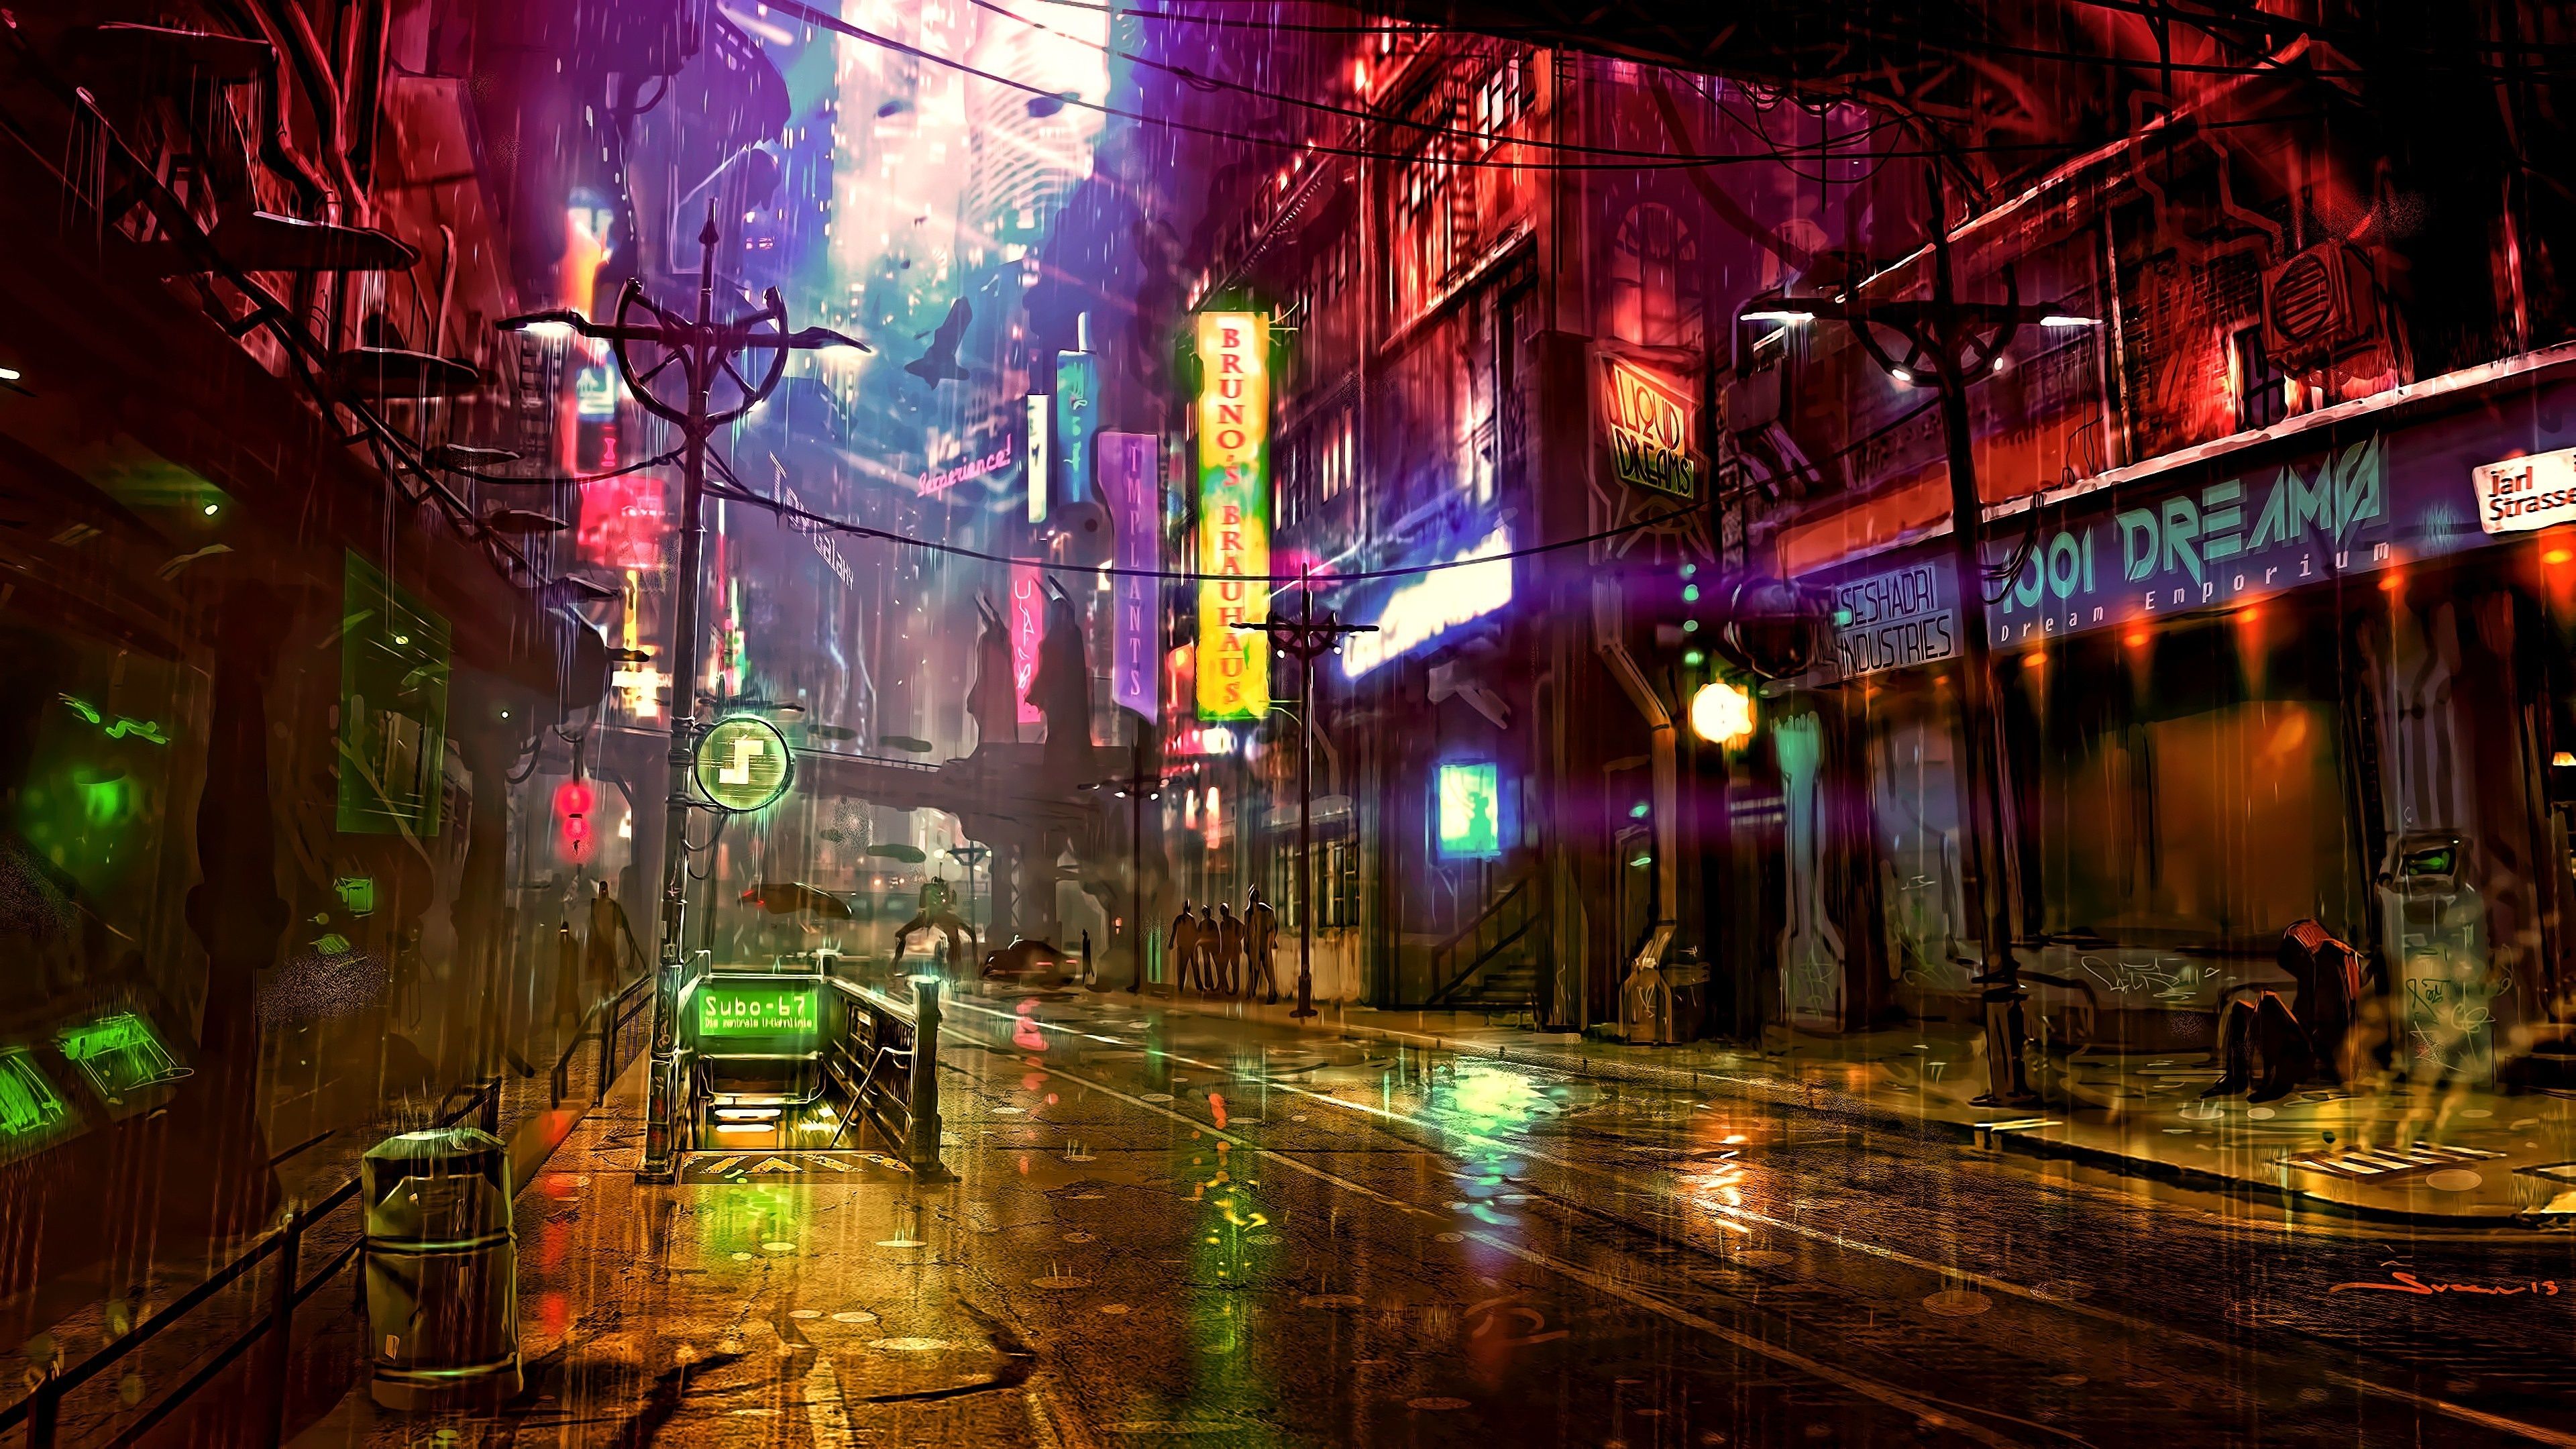 Cyber City Wallpapers Wallpaper Cave